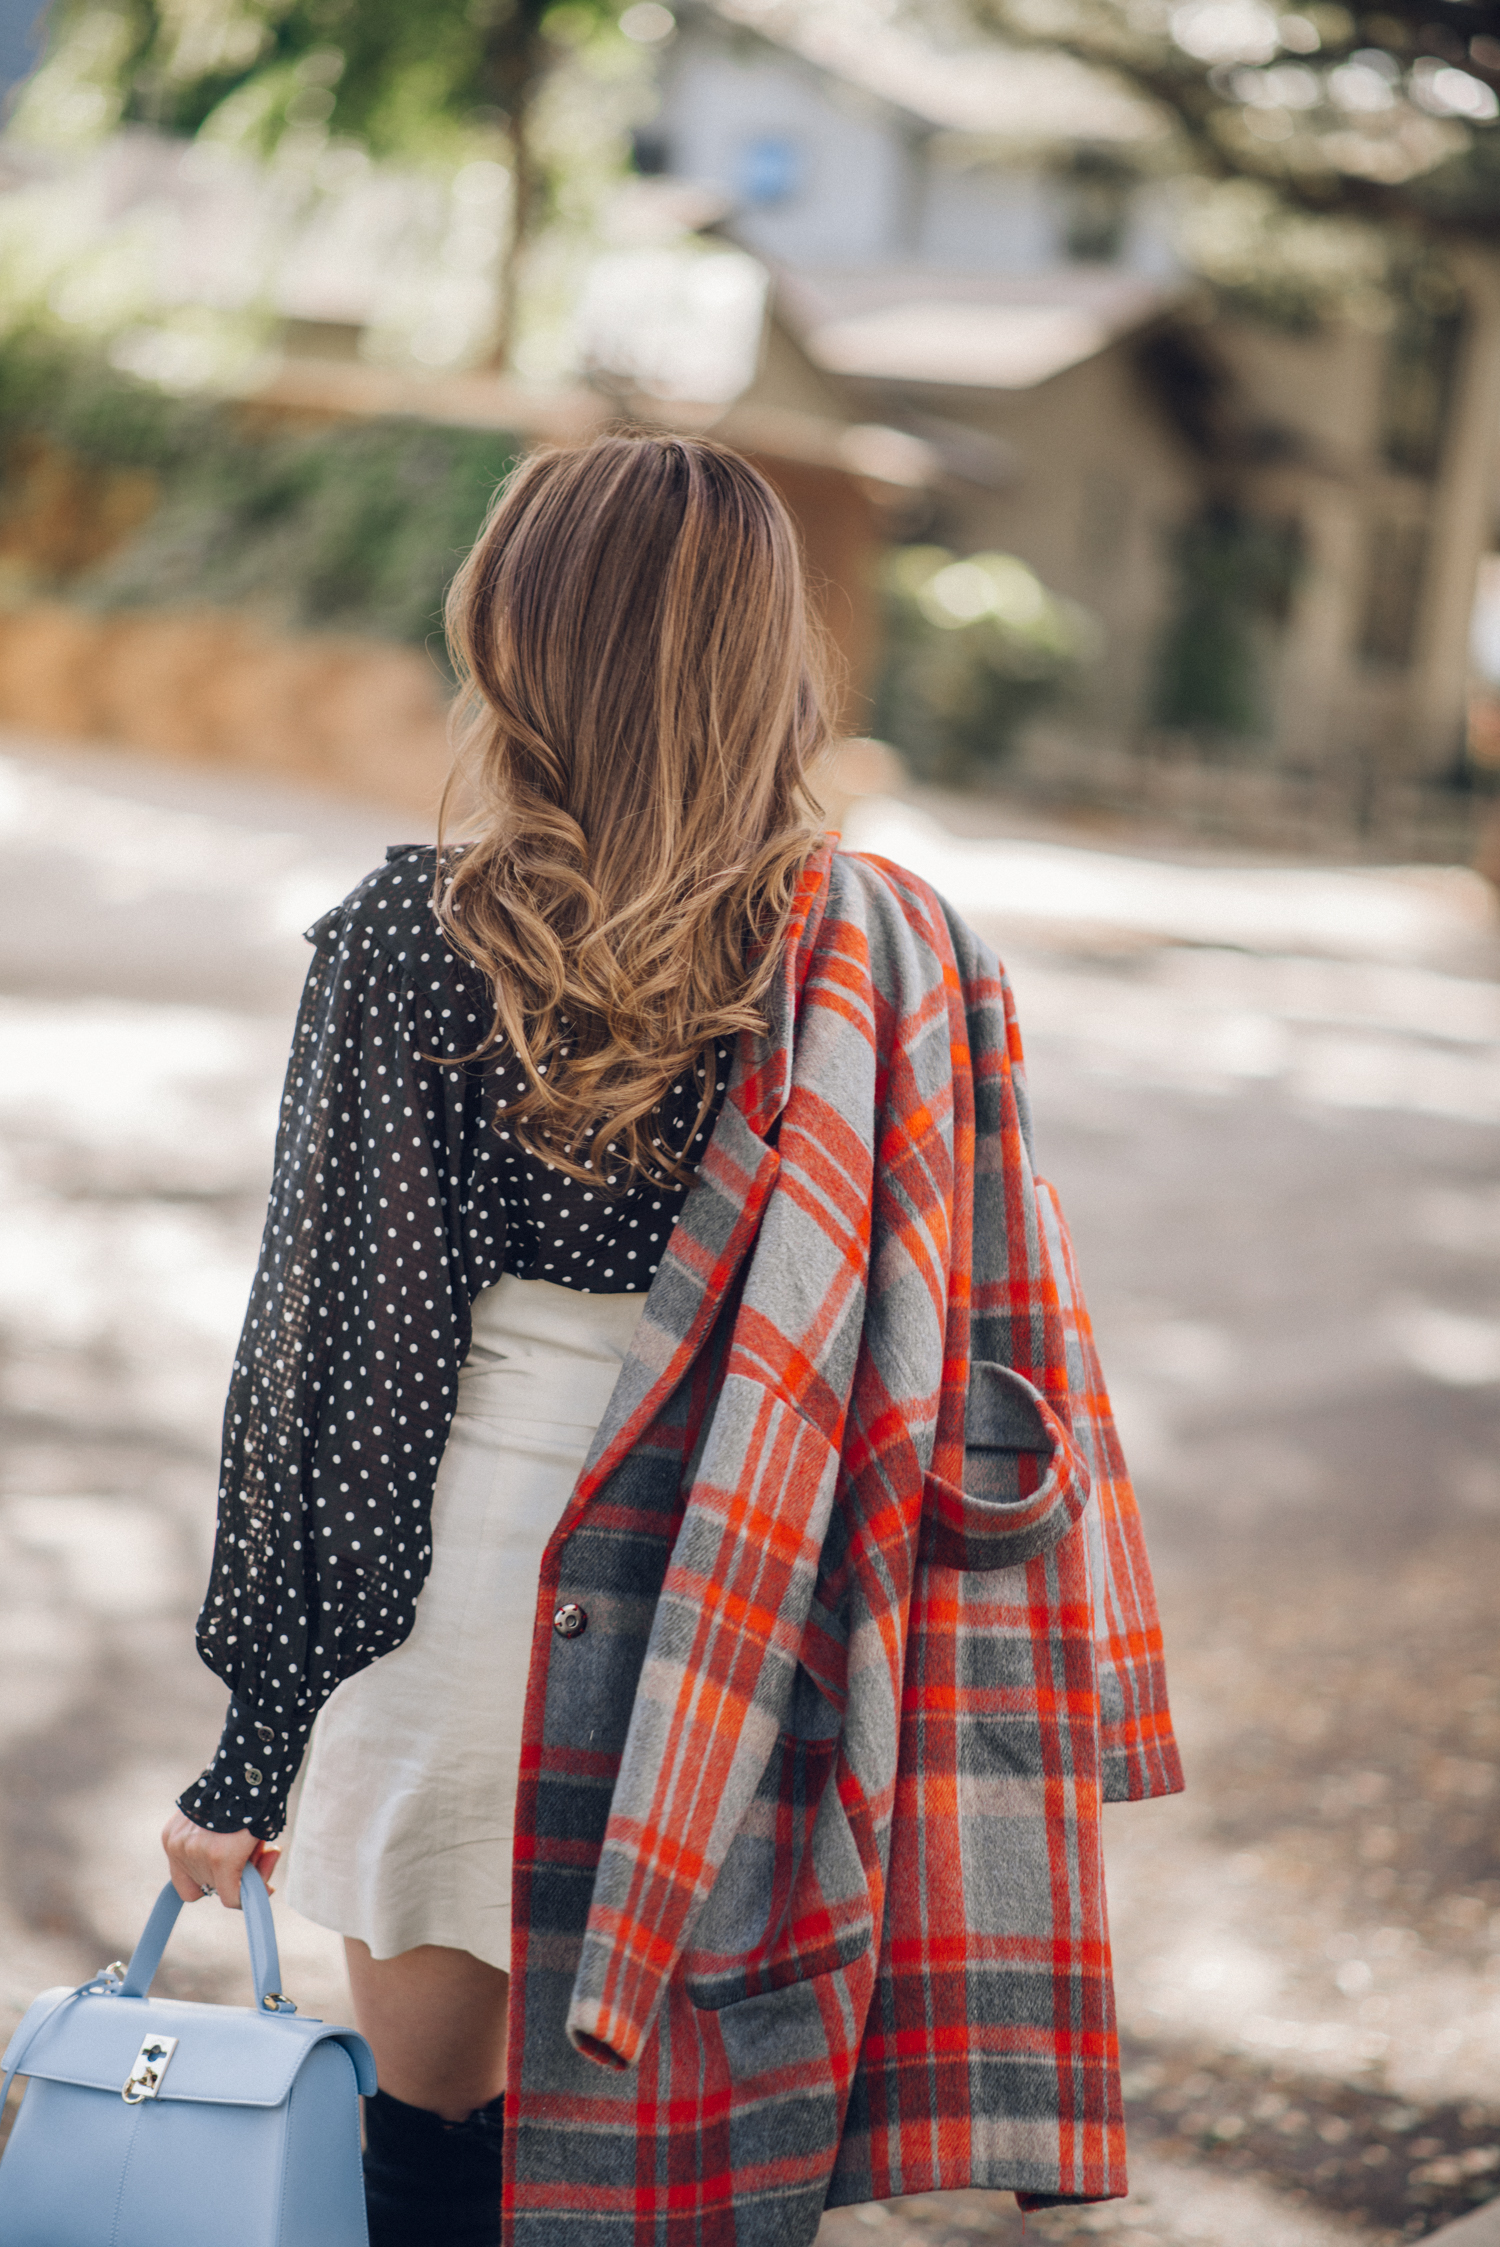 Alyssa Campanella of The A List blog shares her favorite plaid coats for fall wearing DRA plaid coat, Alexa Chung polka dot blouse, Lovers + Friends button up skirt, and Cafune small stance bag